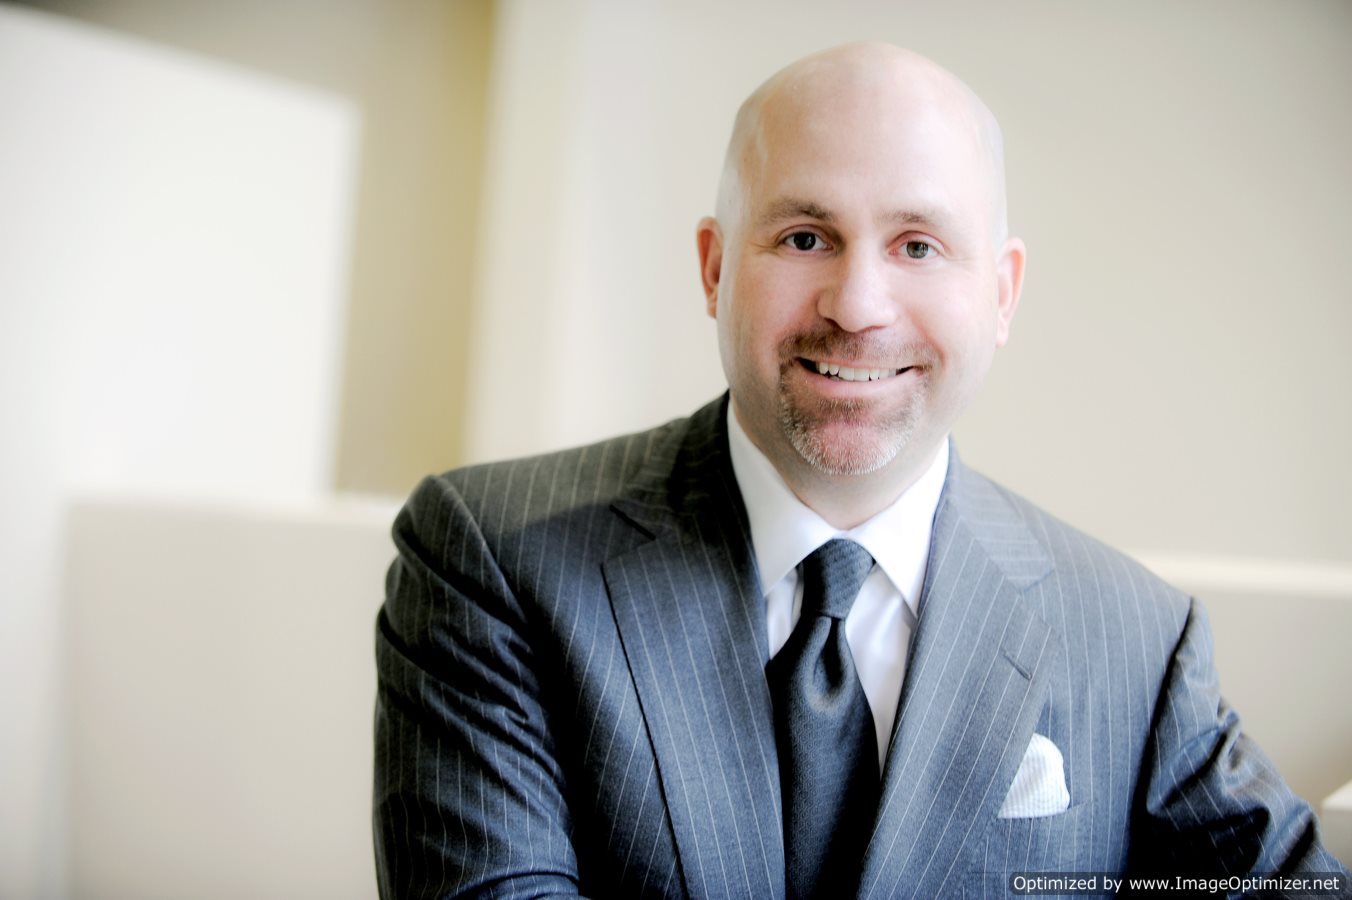 Ohio-Based Attorney Ian Friedman Finds Satisfaction in Criminal Law